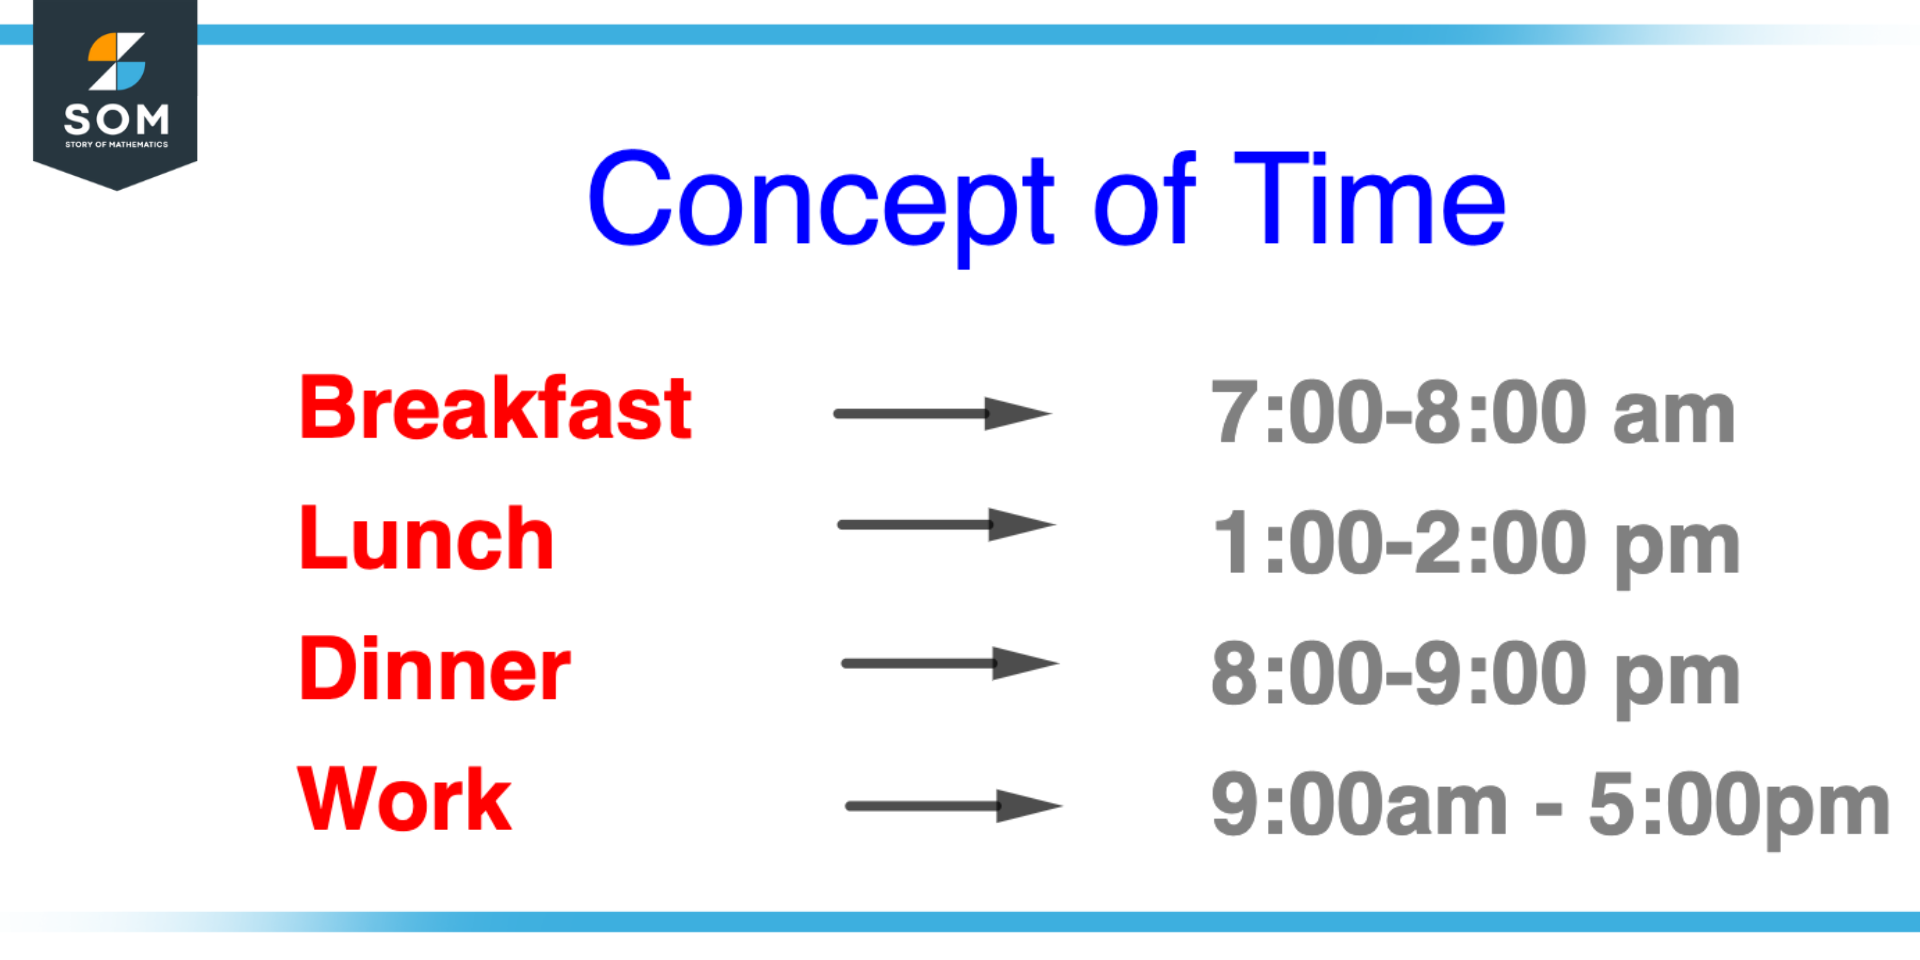 Time as a metric for doing certain events in our daily life